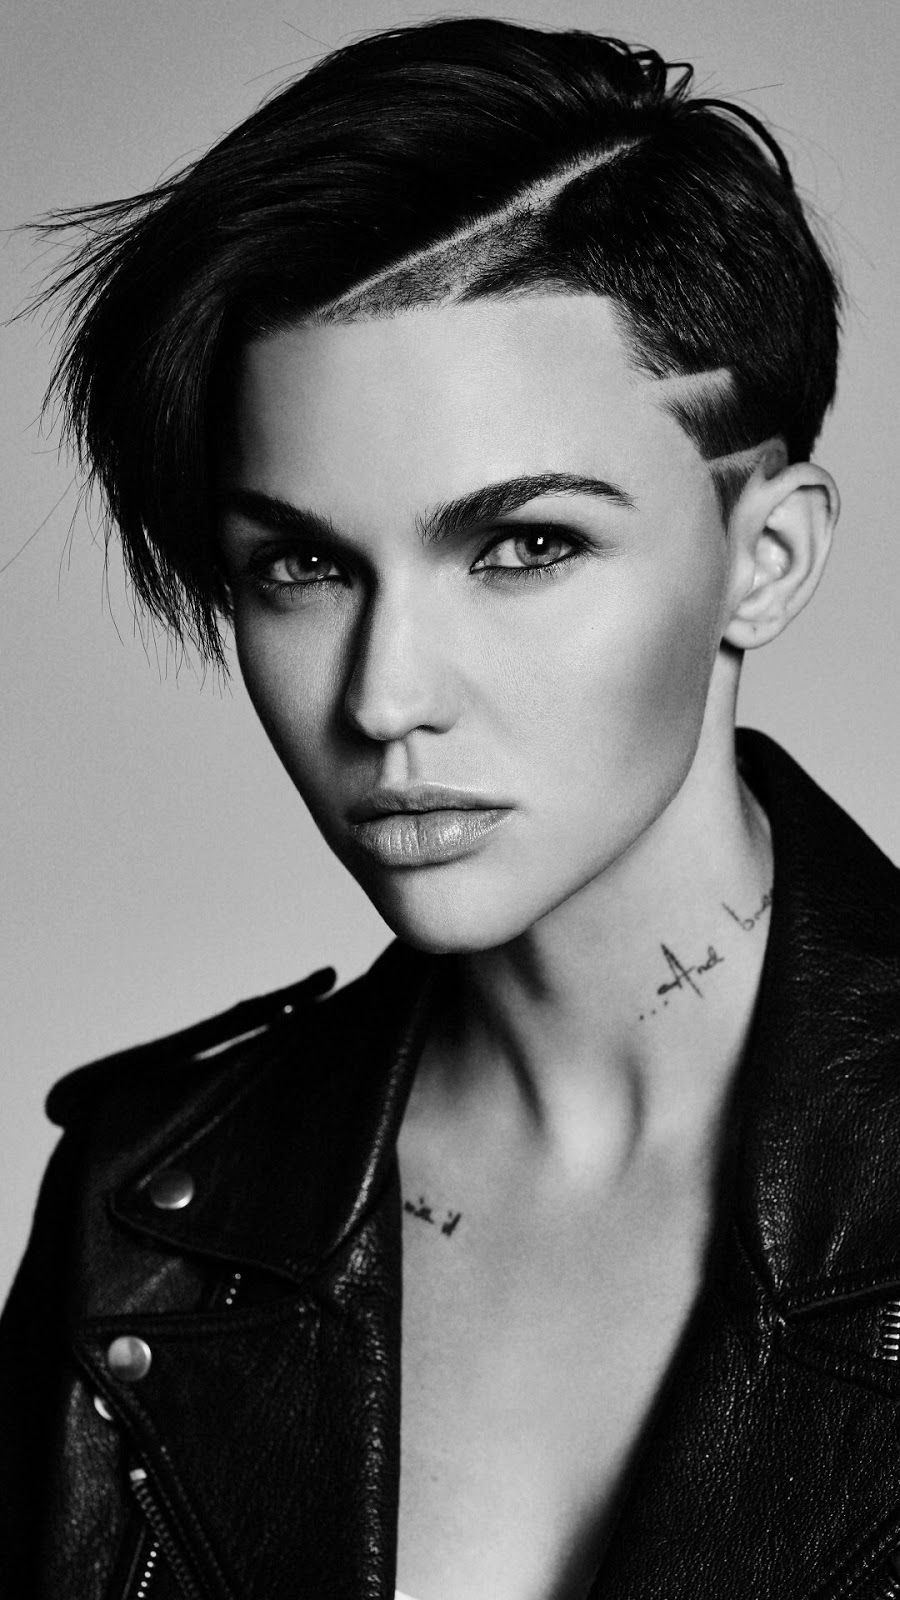 iPhone and Android Wallpaper: Ruby Rose iPhone Wallpaper